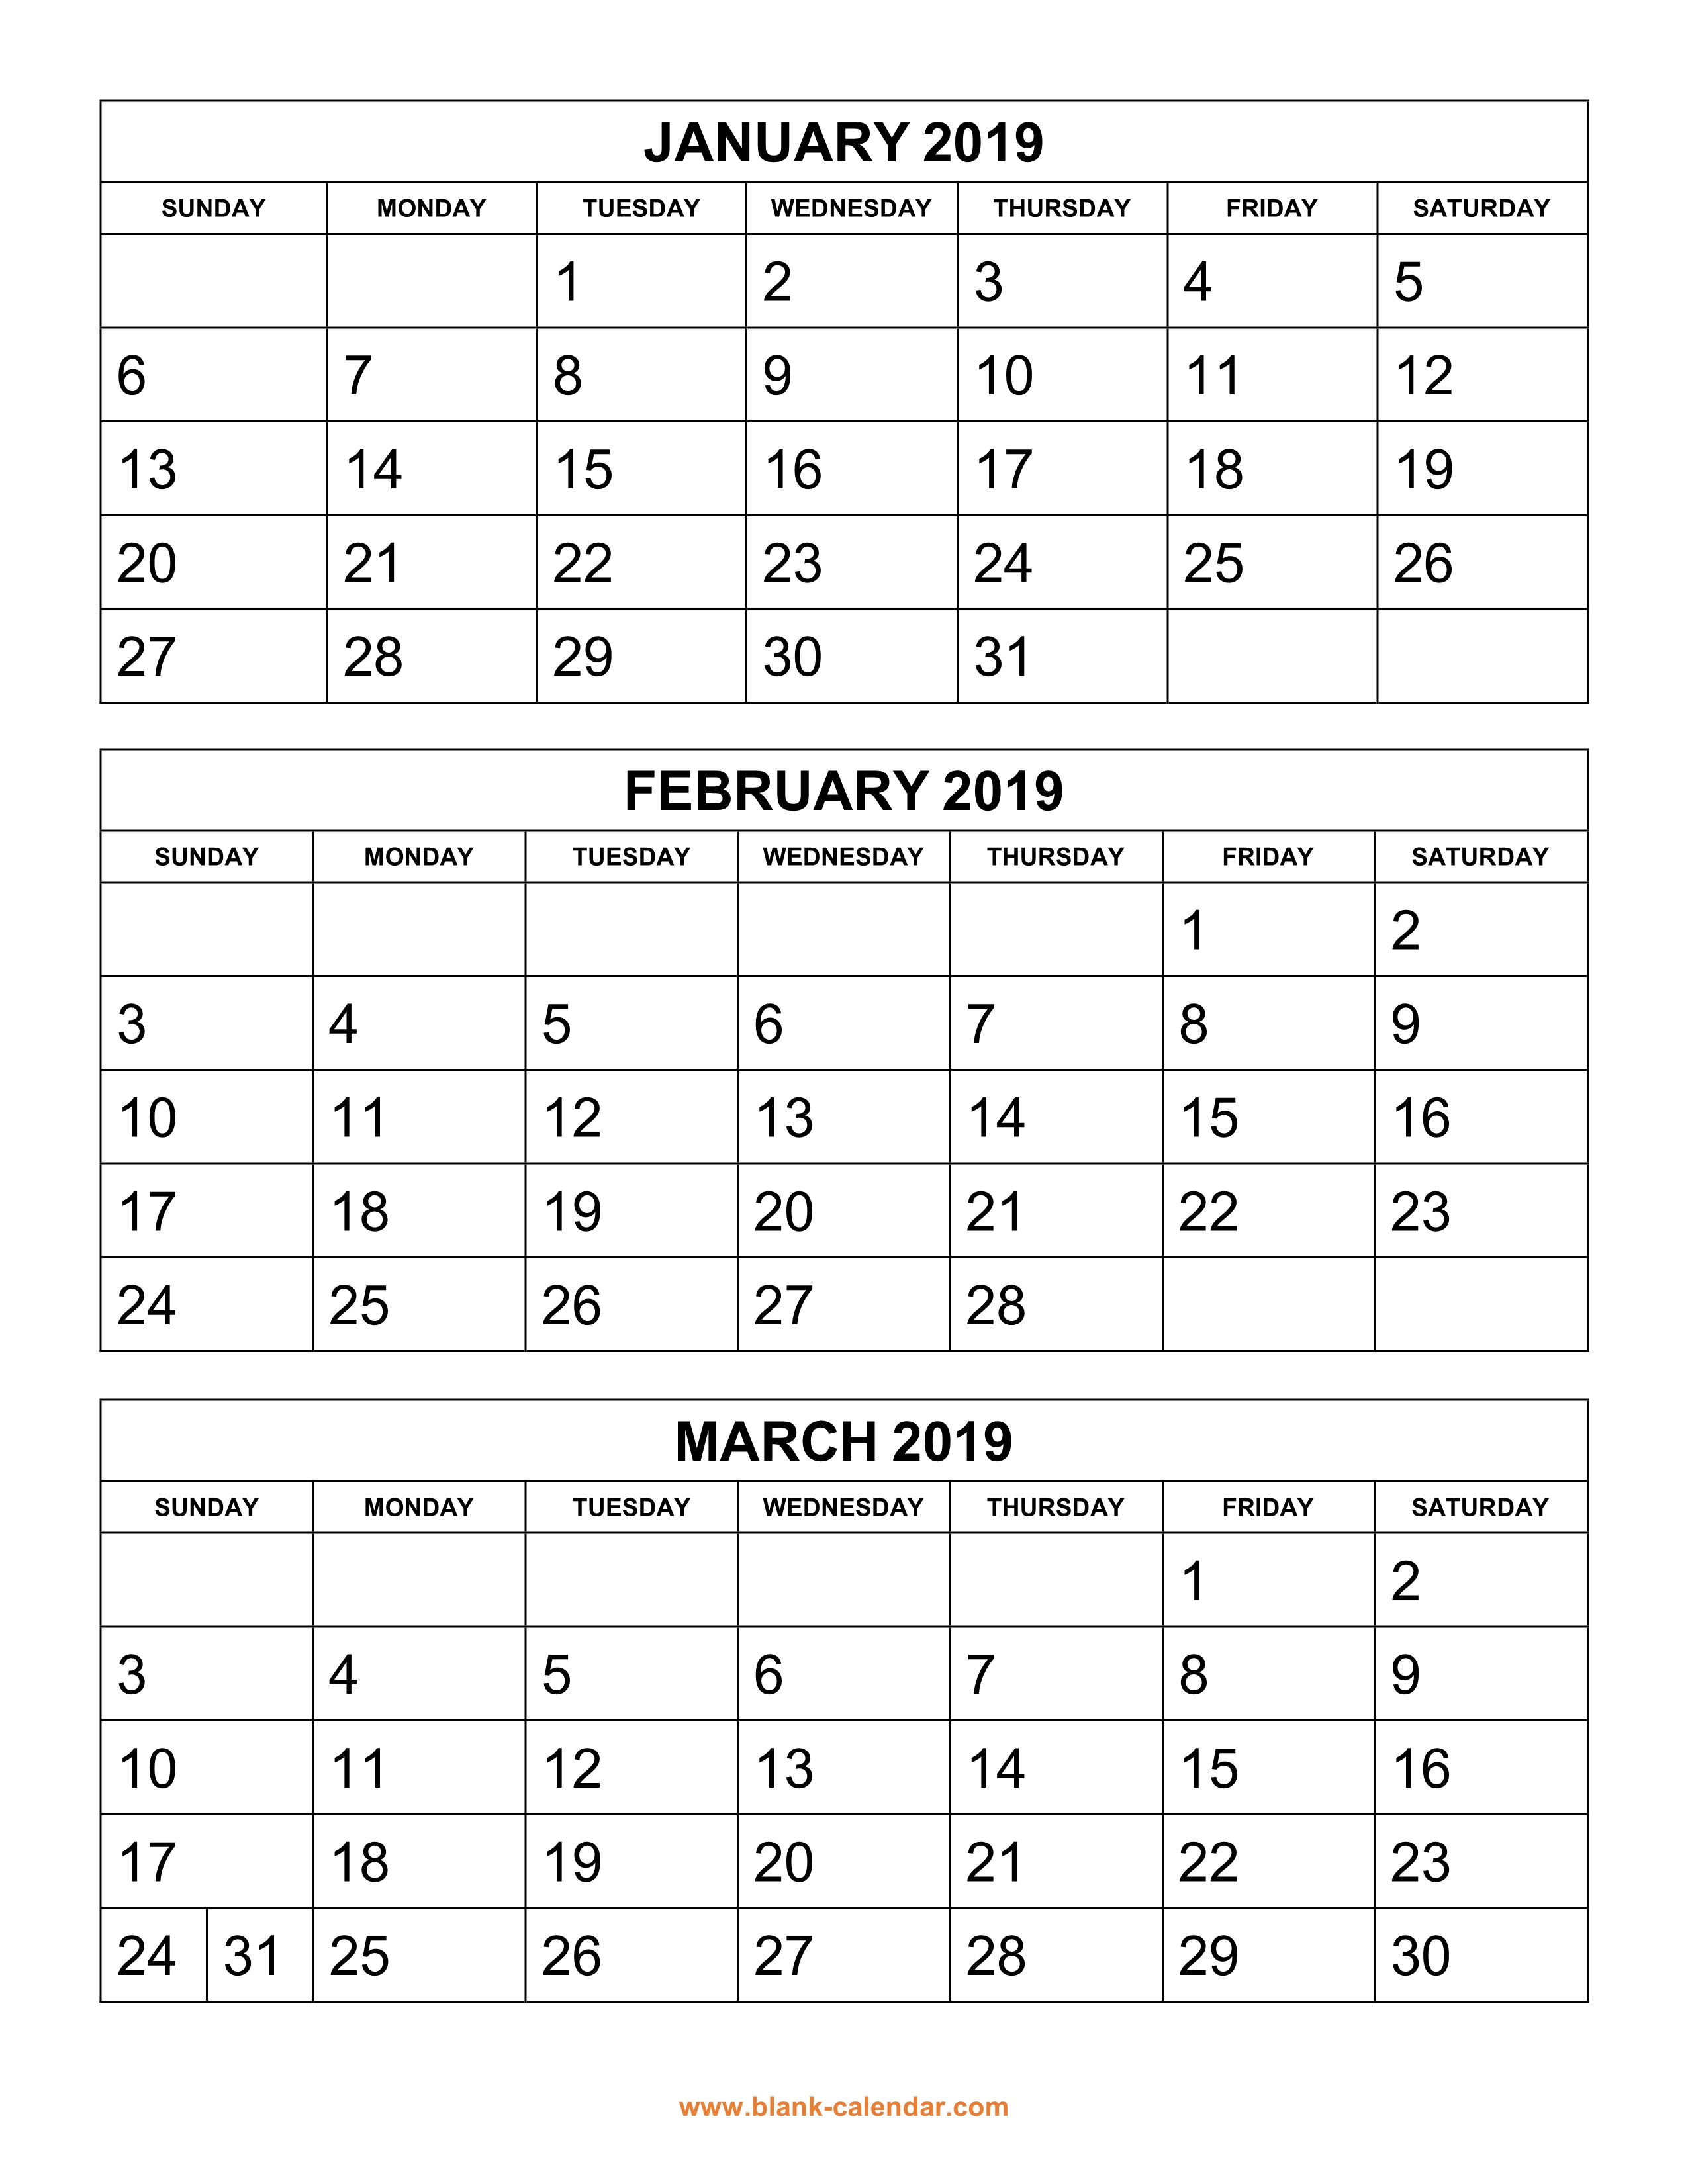 Wrg 8096 Page 4 - free download printable calend!   ar 2019 3 months per page 4 pages vertical